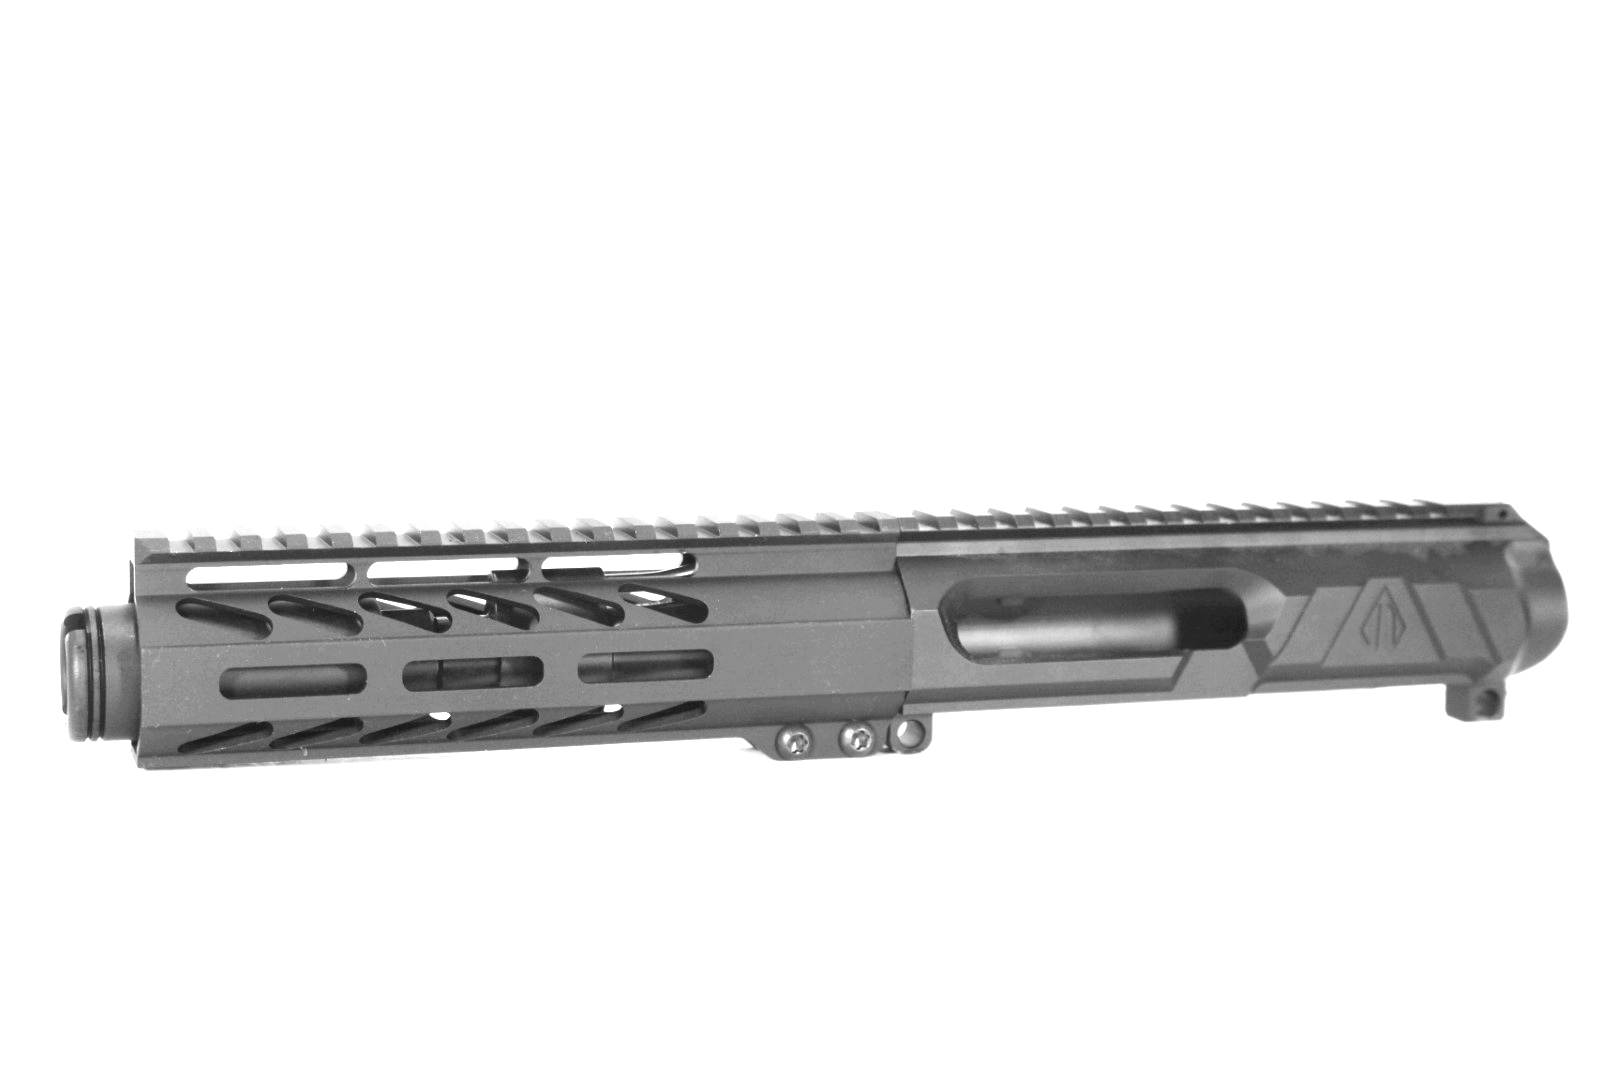 5 inch LEFT HANDED AR-15 NR Side Charging 5.56 NATO Melonite Upper w/Can